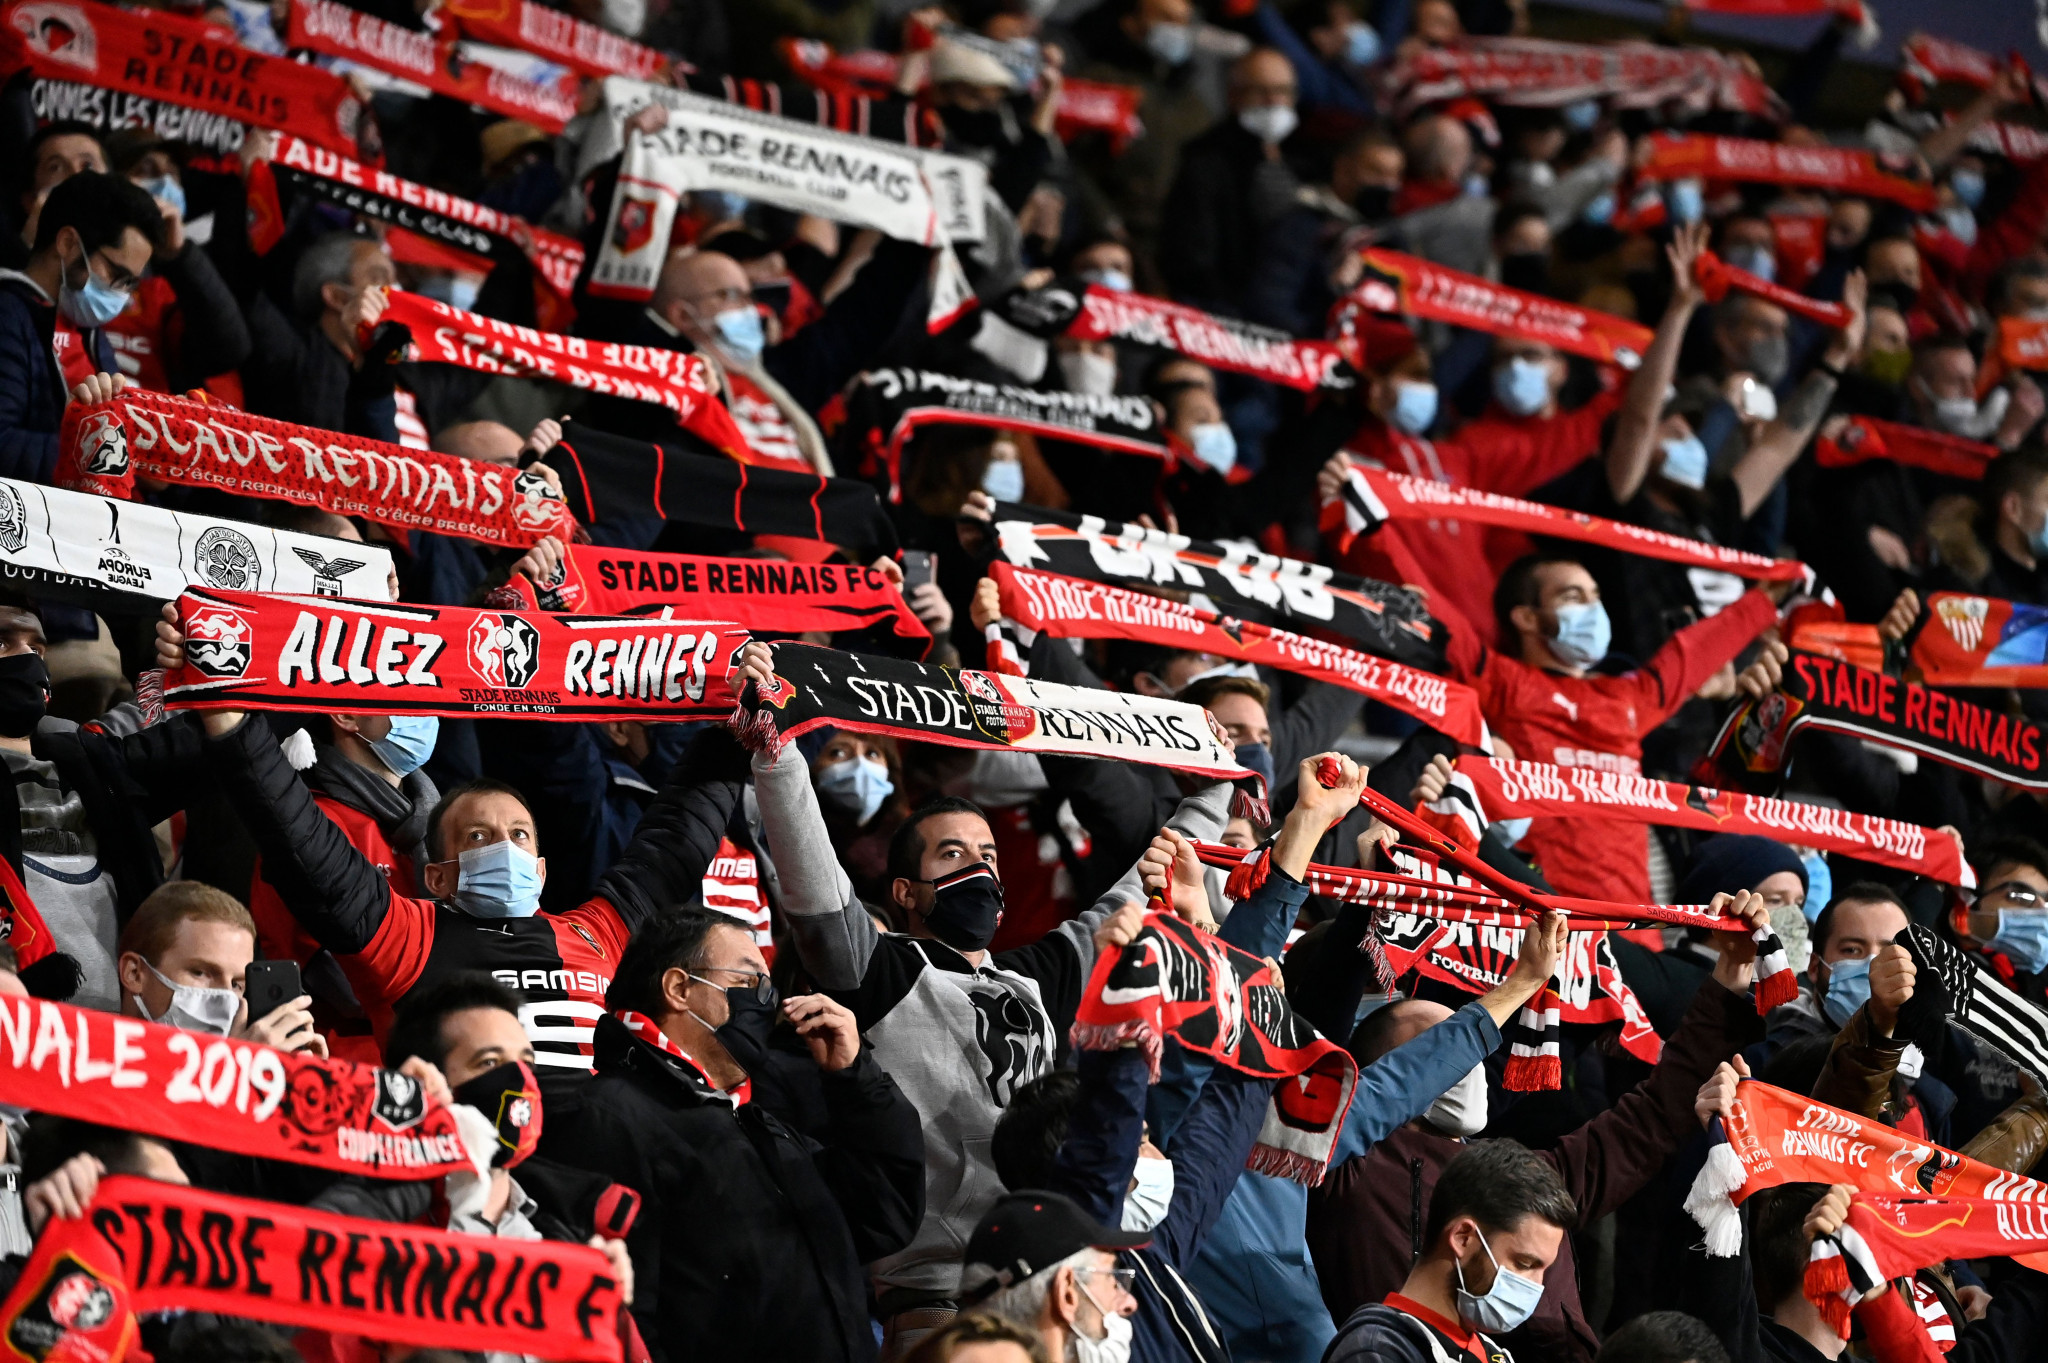 Spectators at the Champions League game between Rennes and Krasnodar were criticised for appearing to breach social distancing rules ©Getty Images